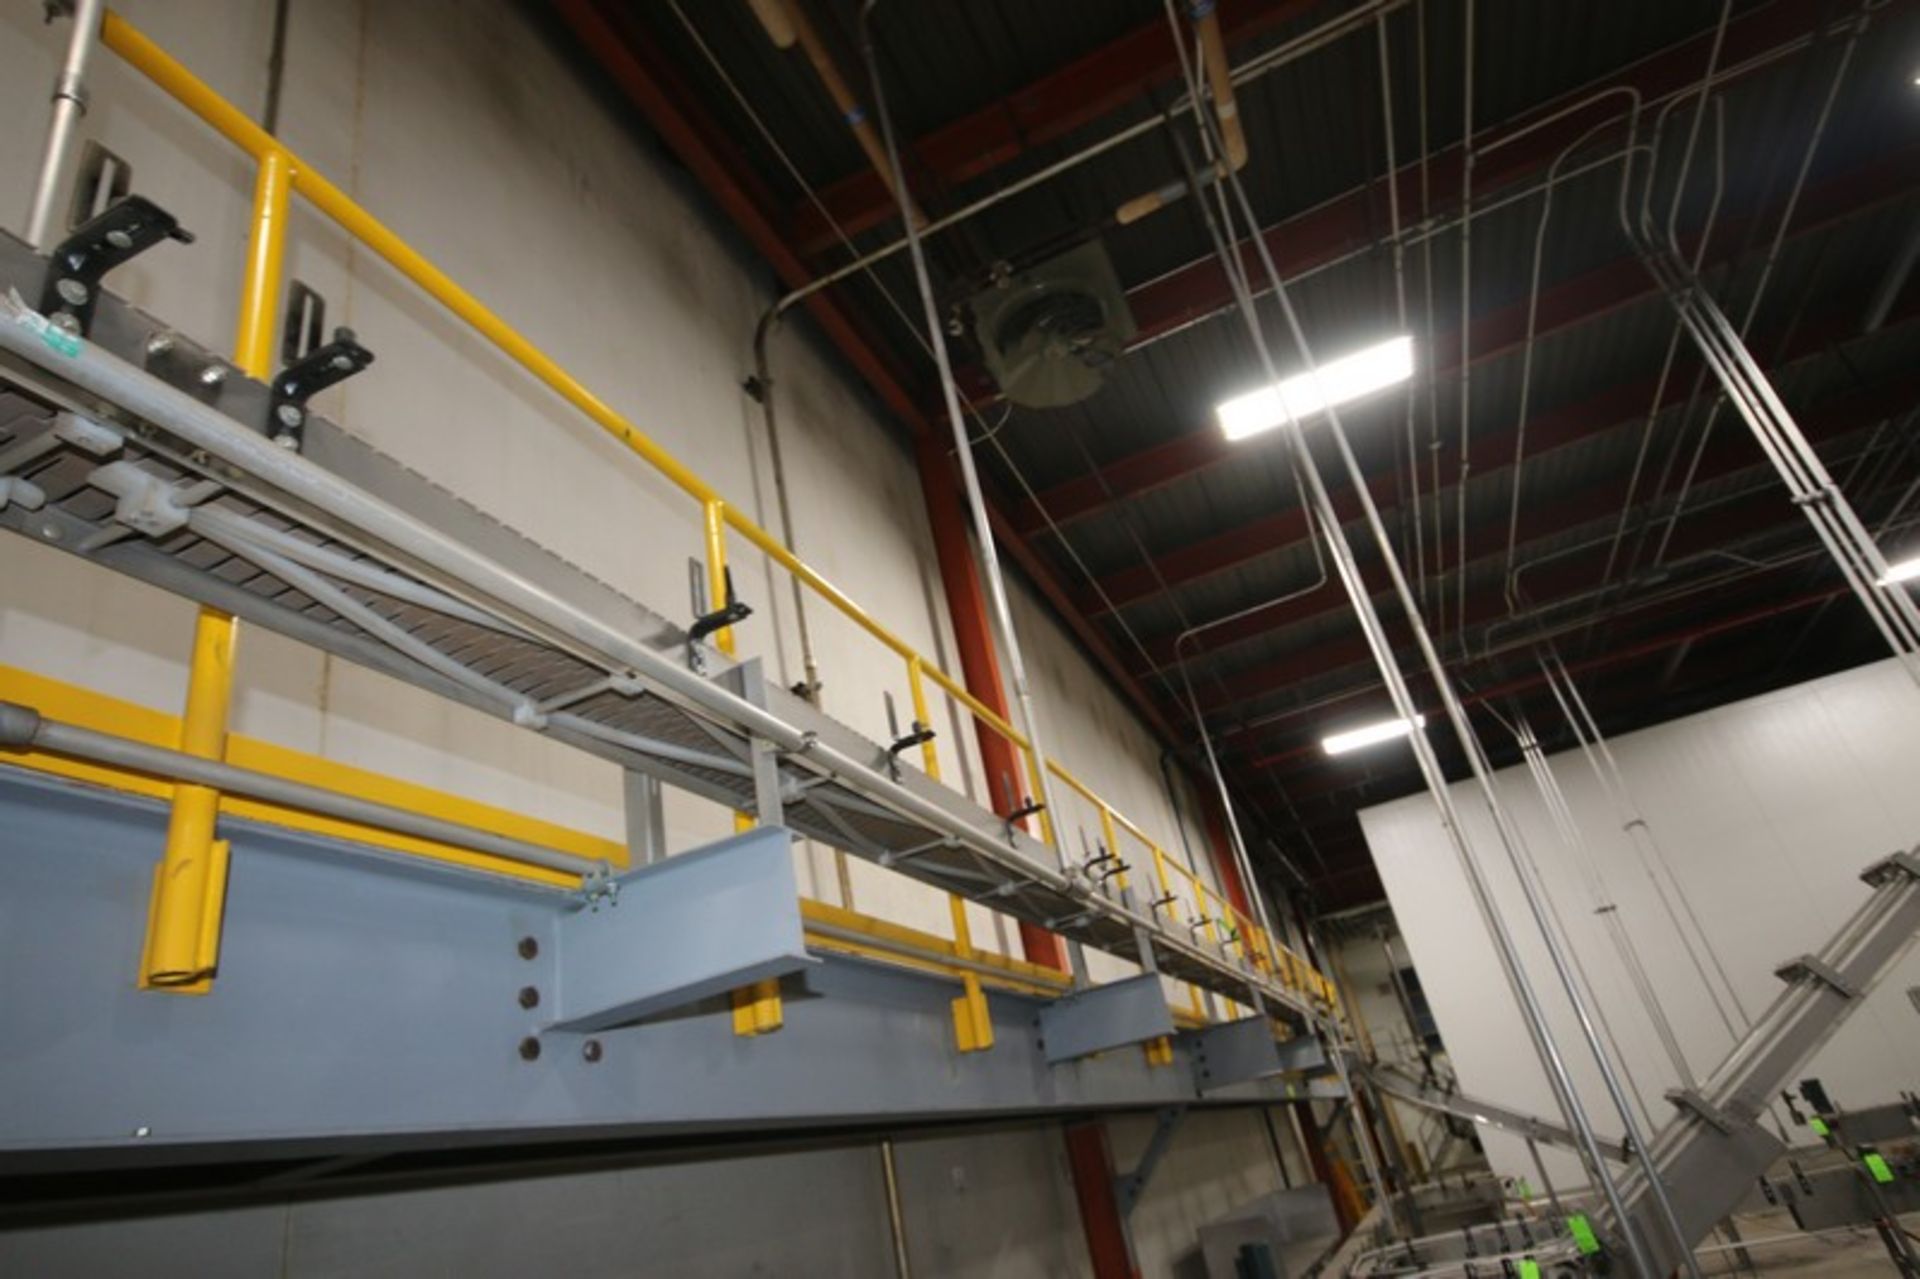 4-Sections of S/S Nercon Conveyor, Overall Lenth of Conveyor: Aprox. 125 ft. L, with (2) Incline - Image 7 of 8